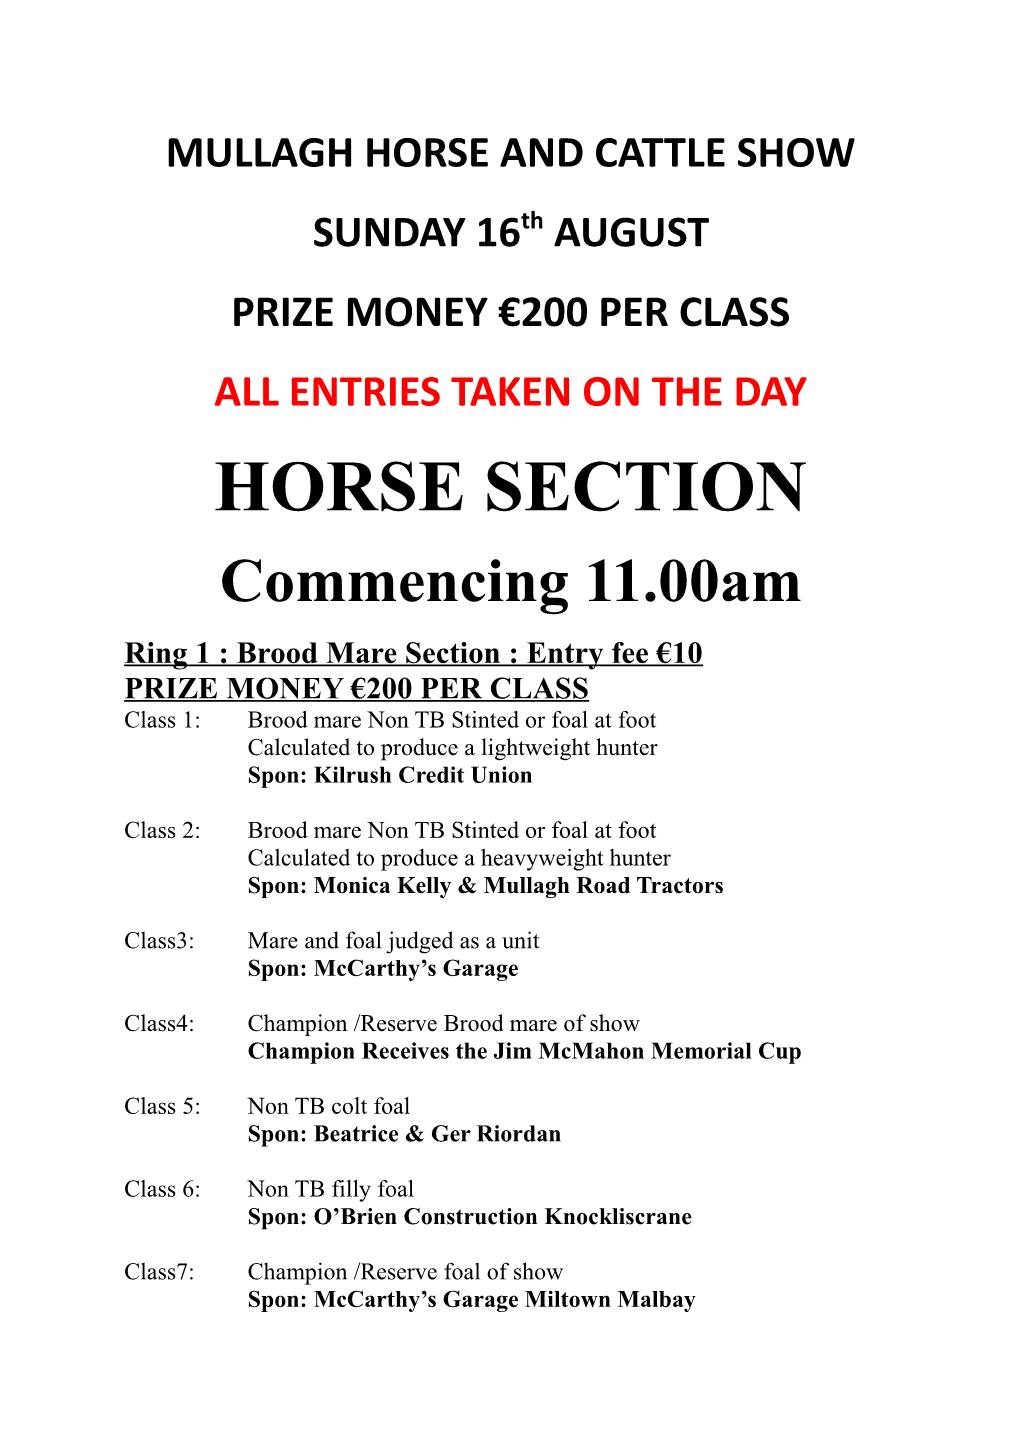 Mullagh Horse and Cattle Show